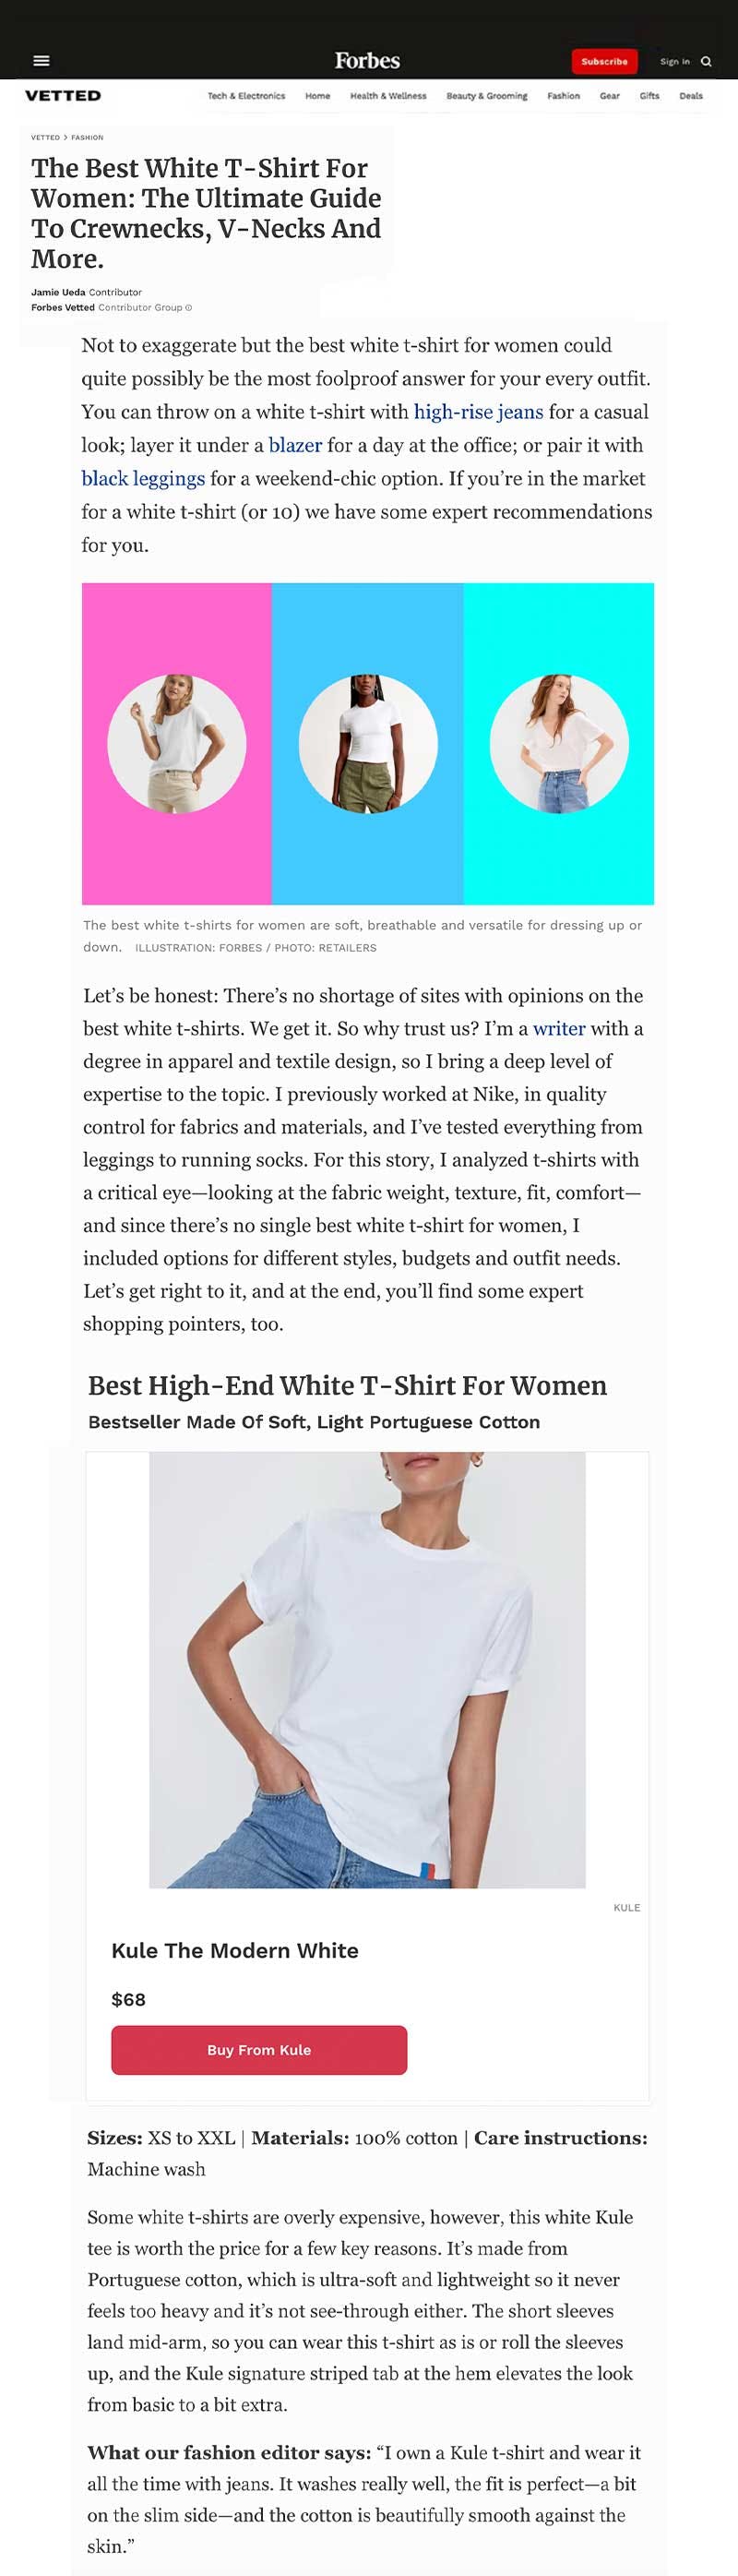 Forbes featuring KULE Modern White as best high-end white t-shirt